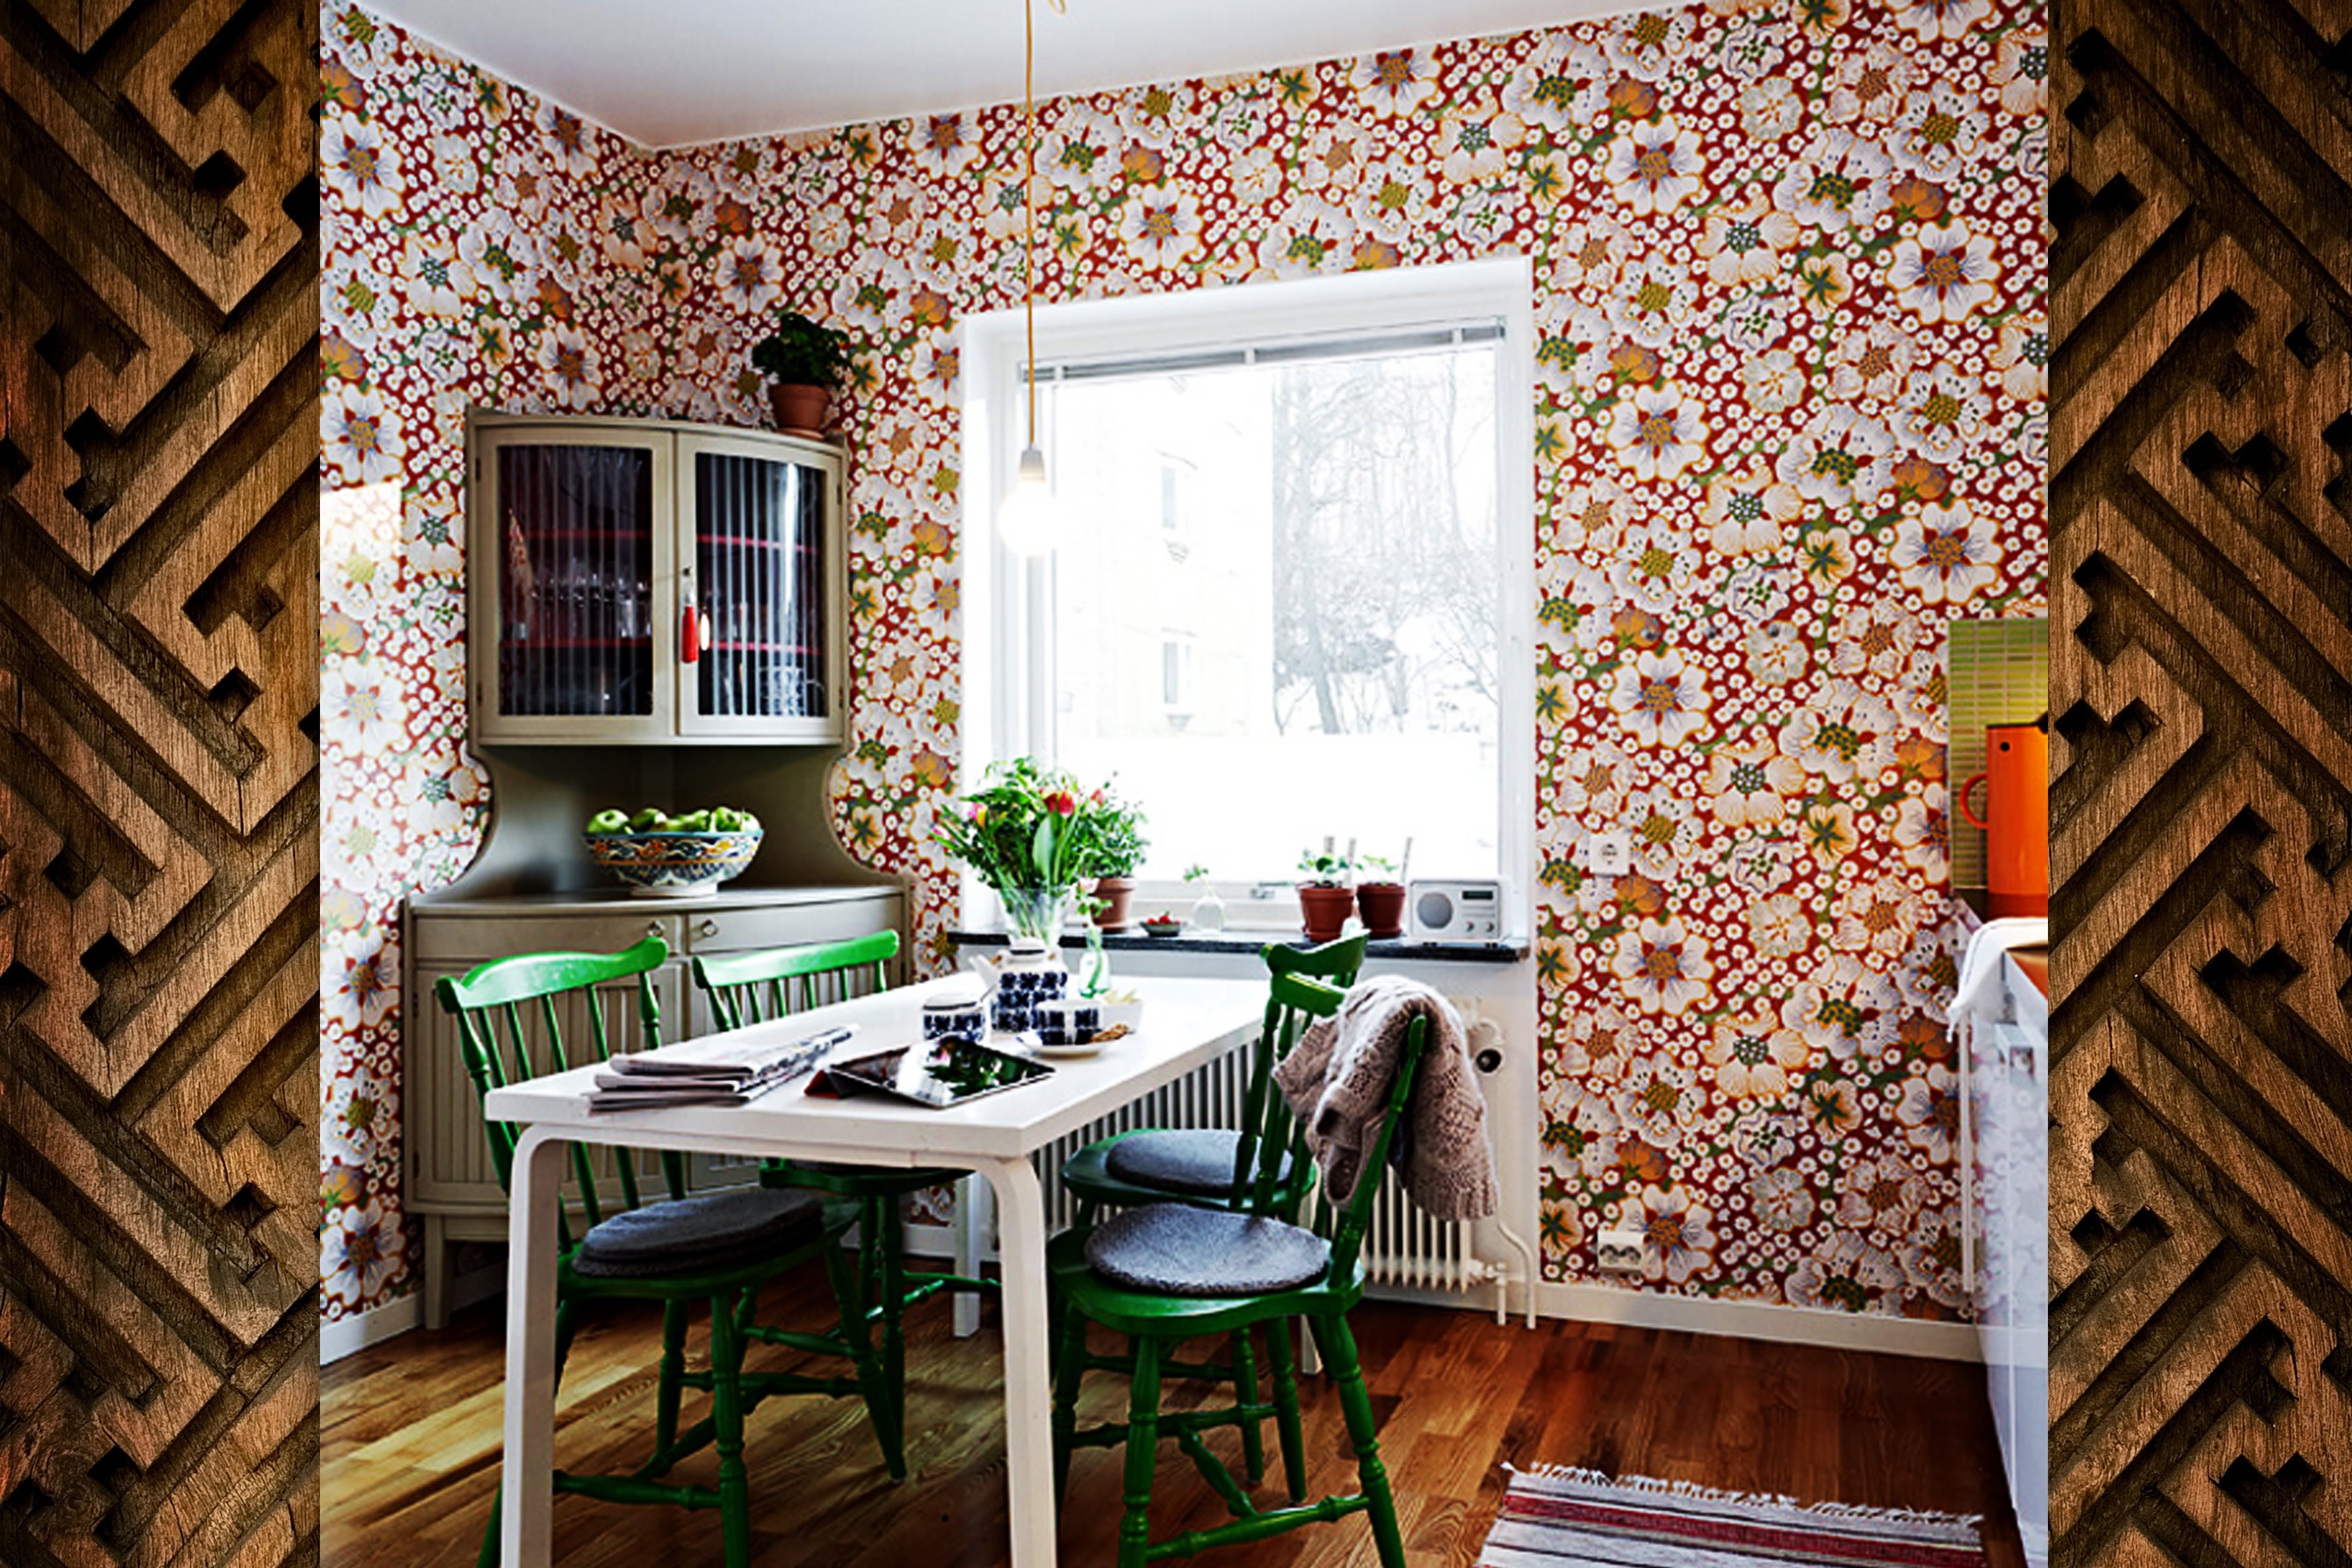 wallpaper in the country kitchen